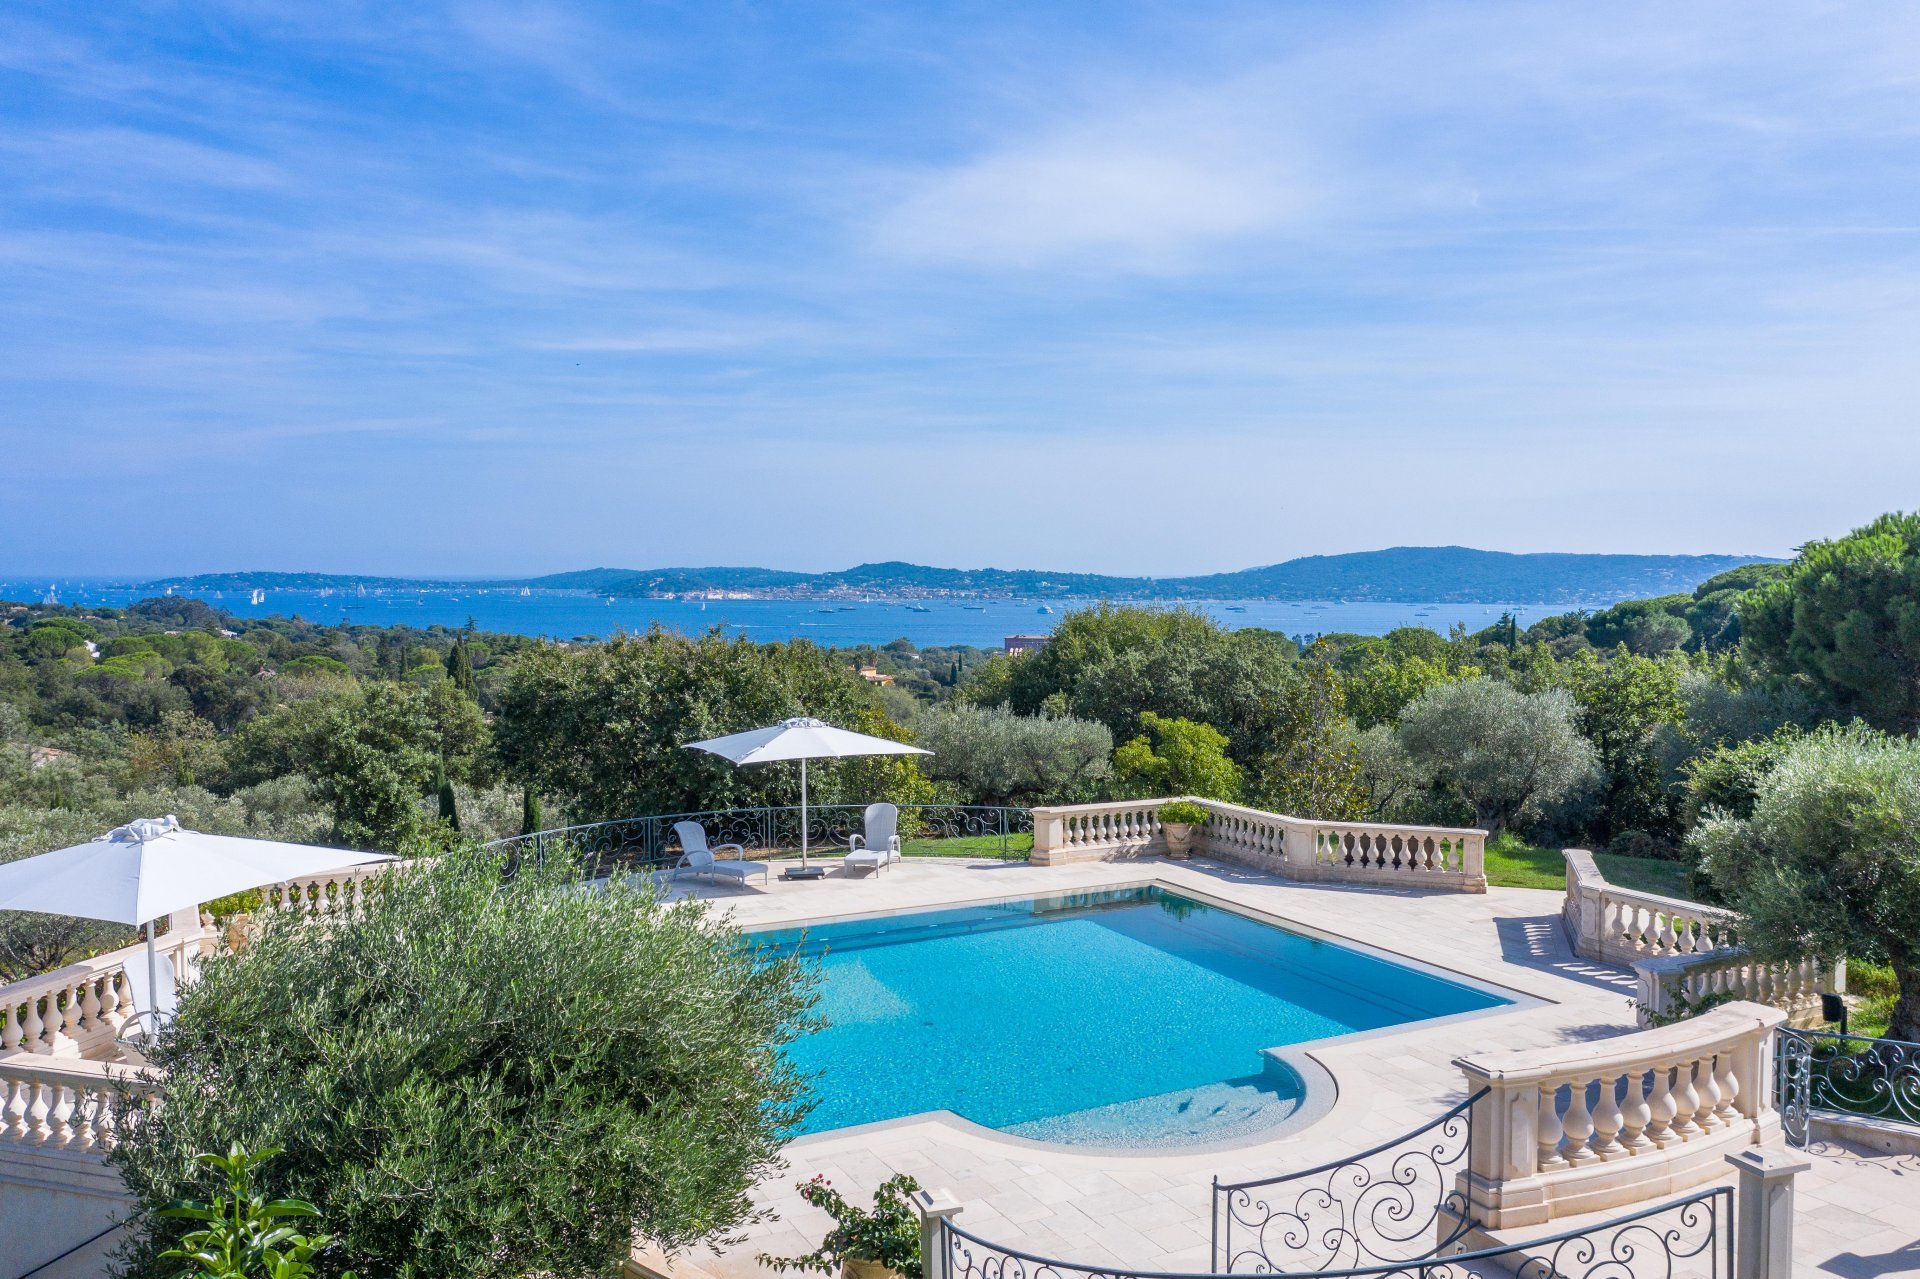 Francis York Iconic French Riviera Villa Overlooking the Bay of Saint Tropez 4.jpg